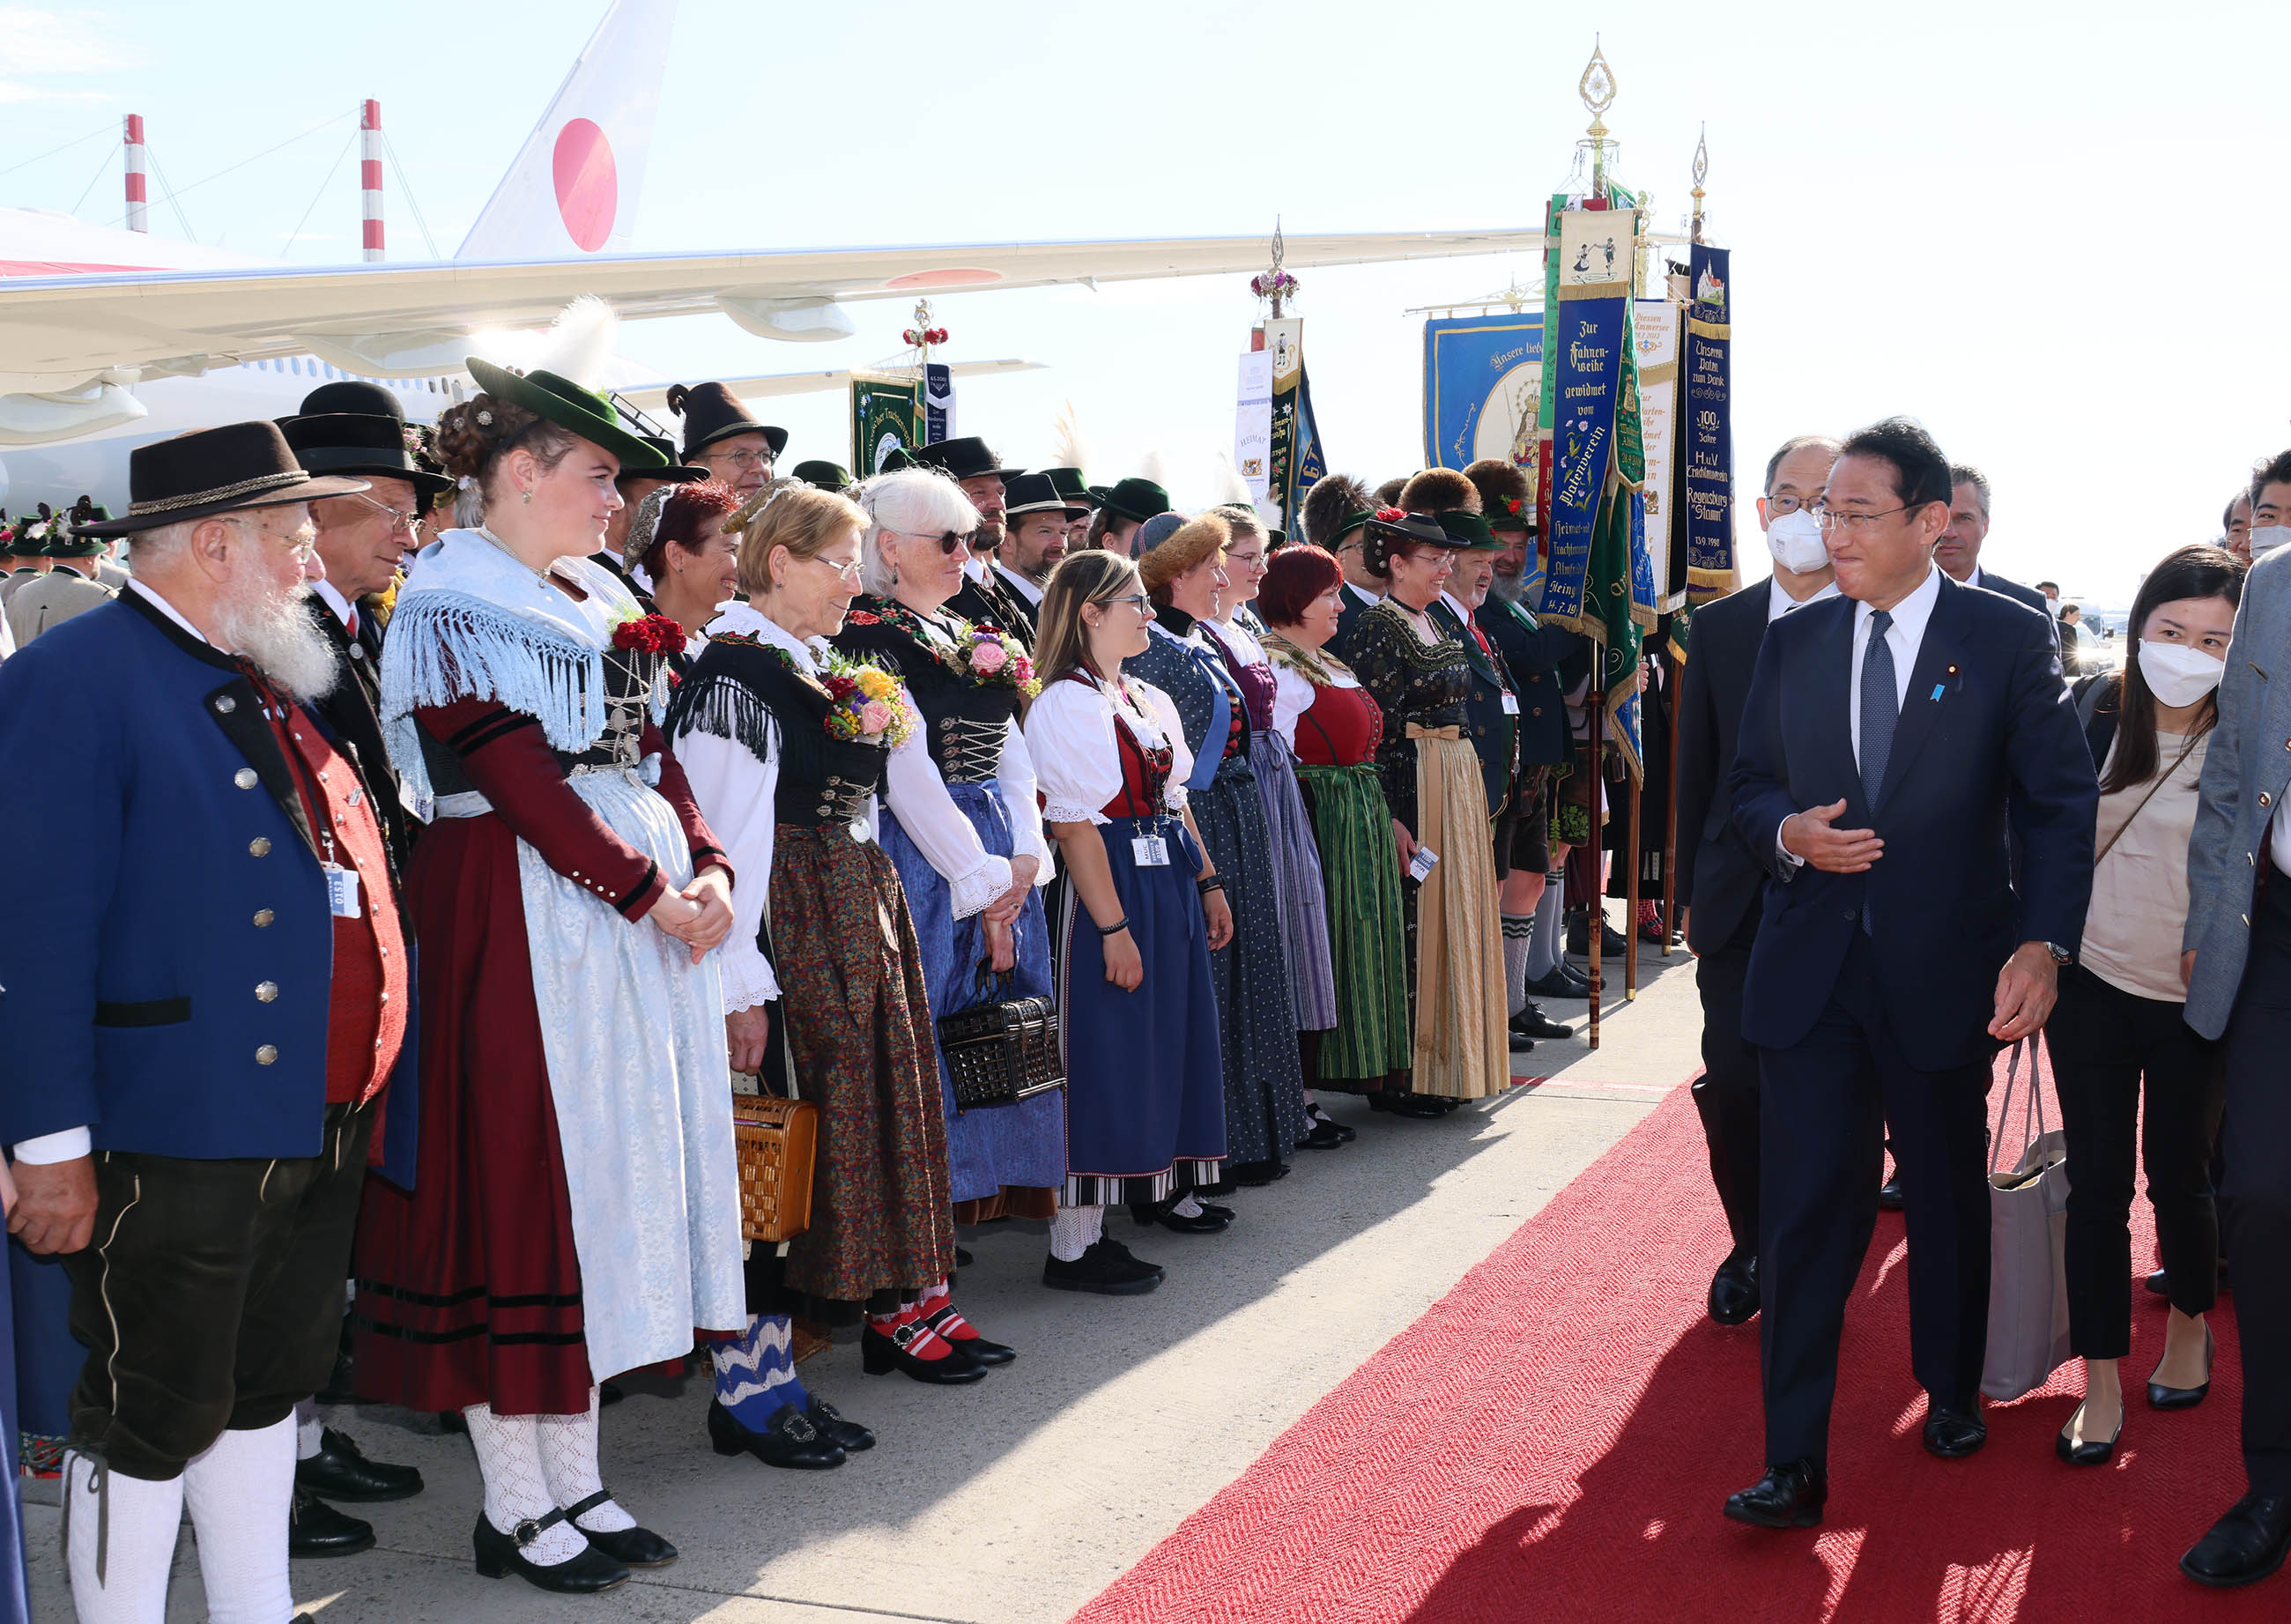 Photograph of the Prime Minister arriving in Germany (4)